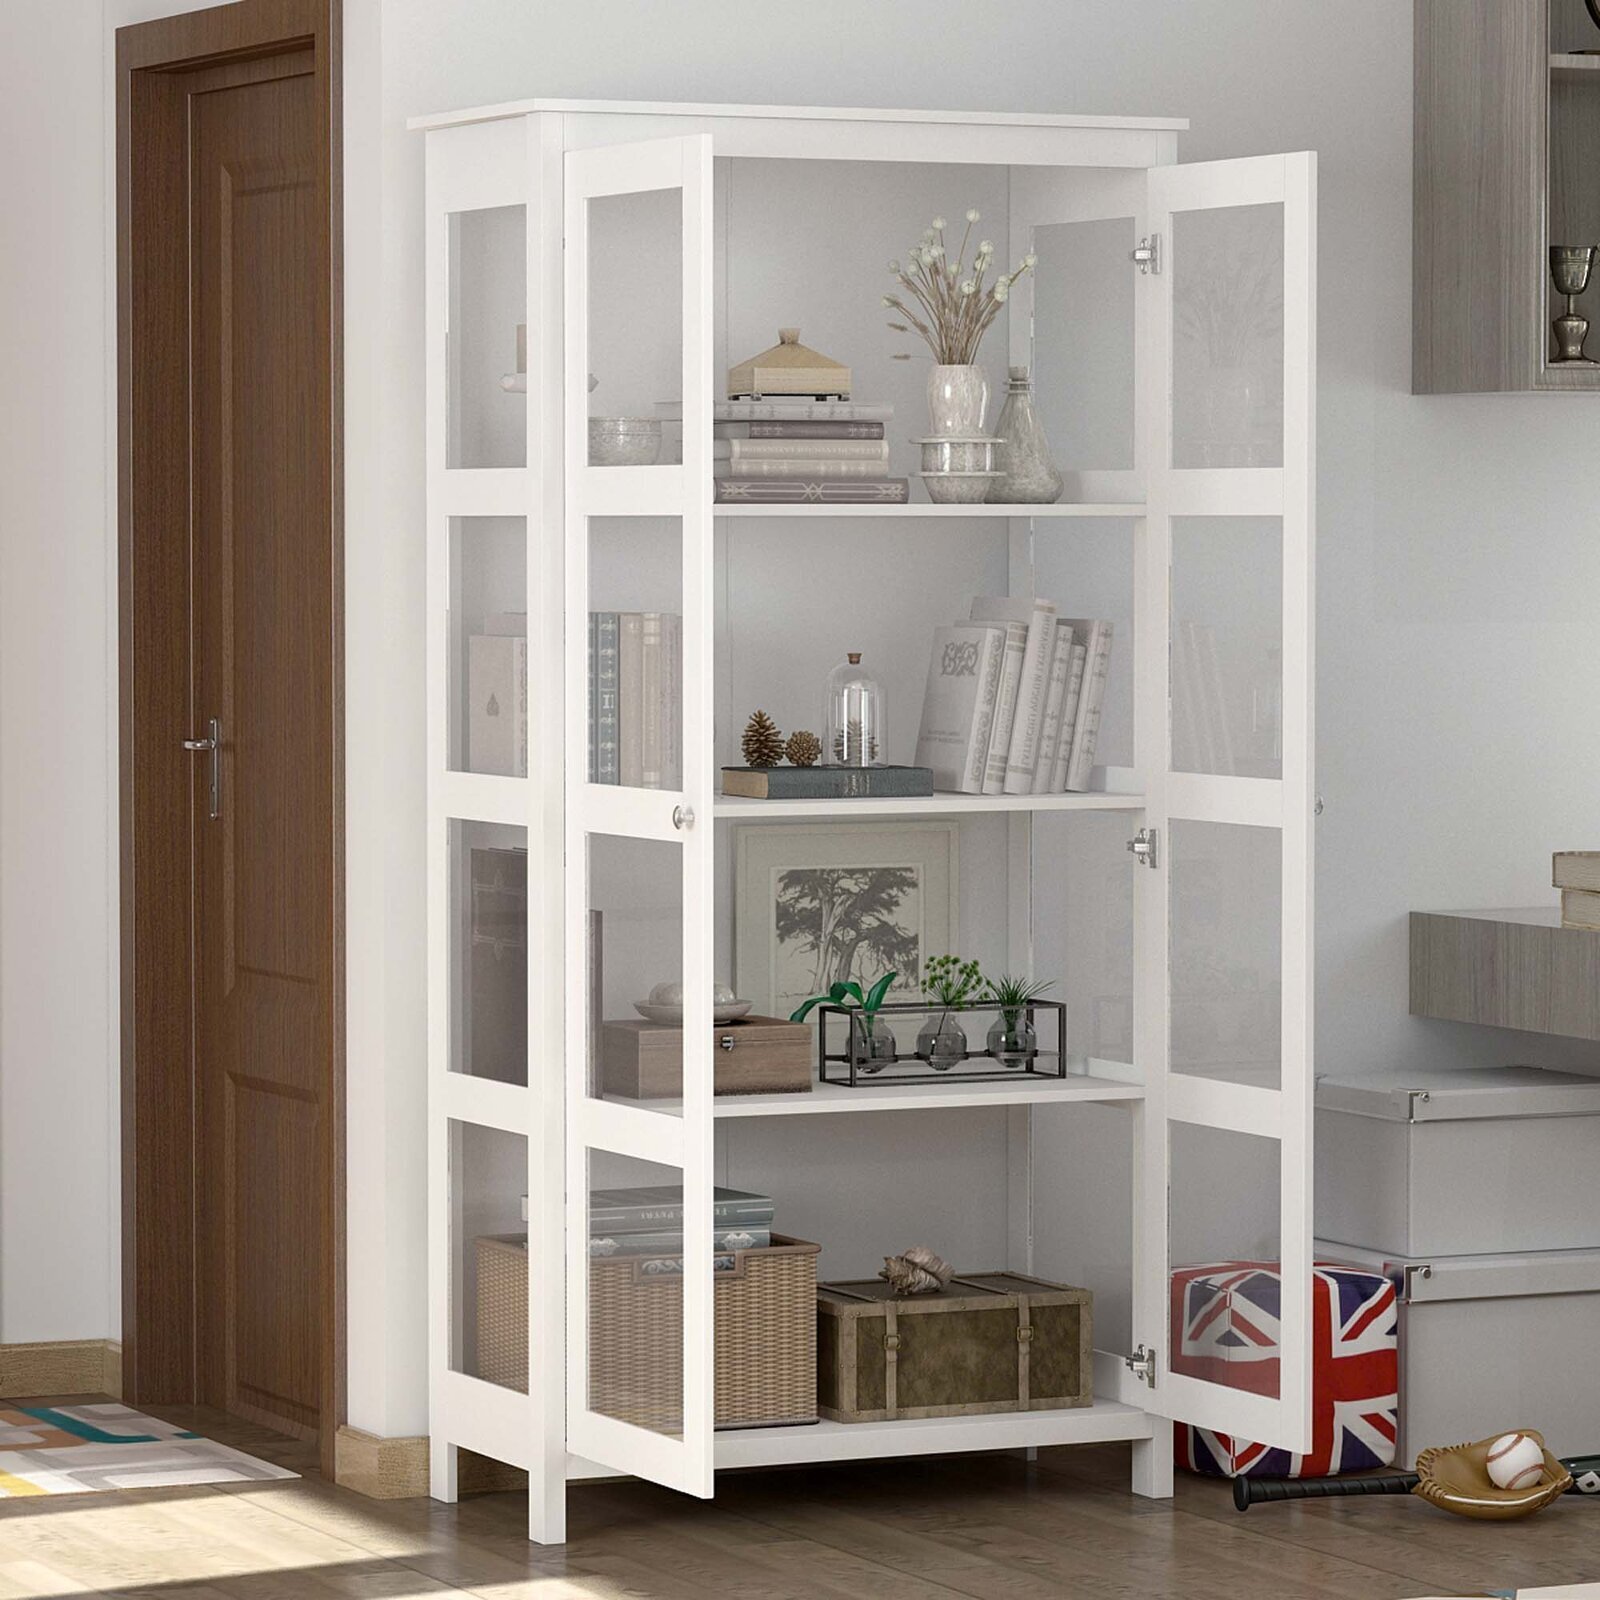 Standard Library Cabinet With Glass Doors